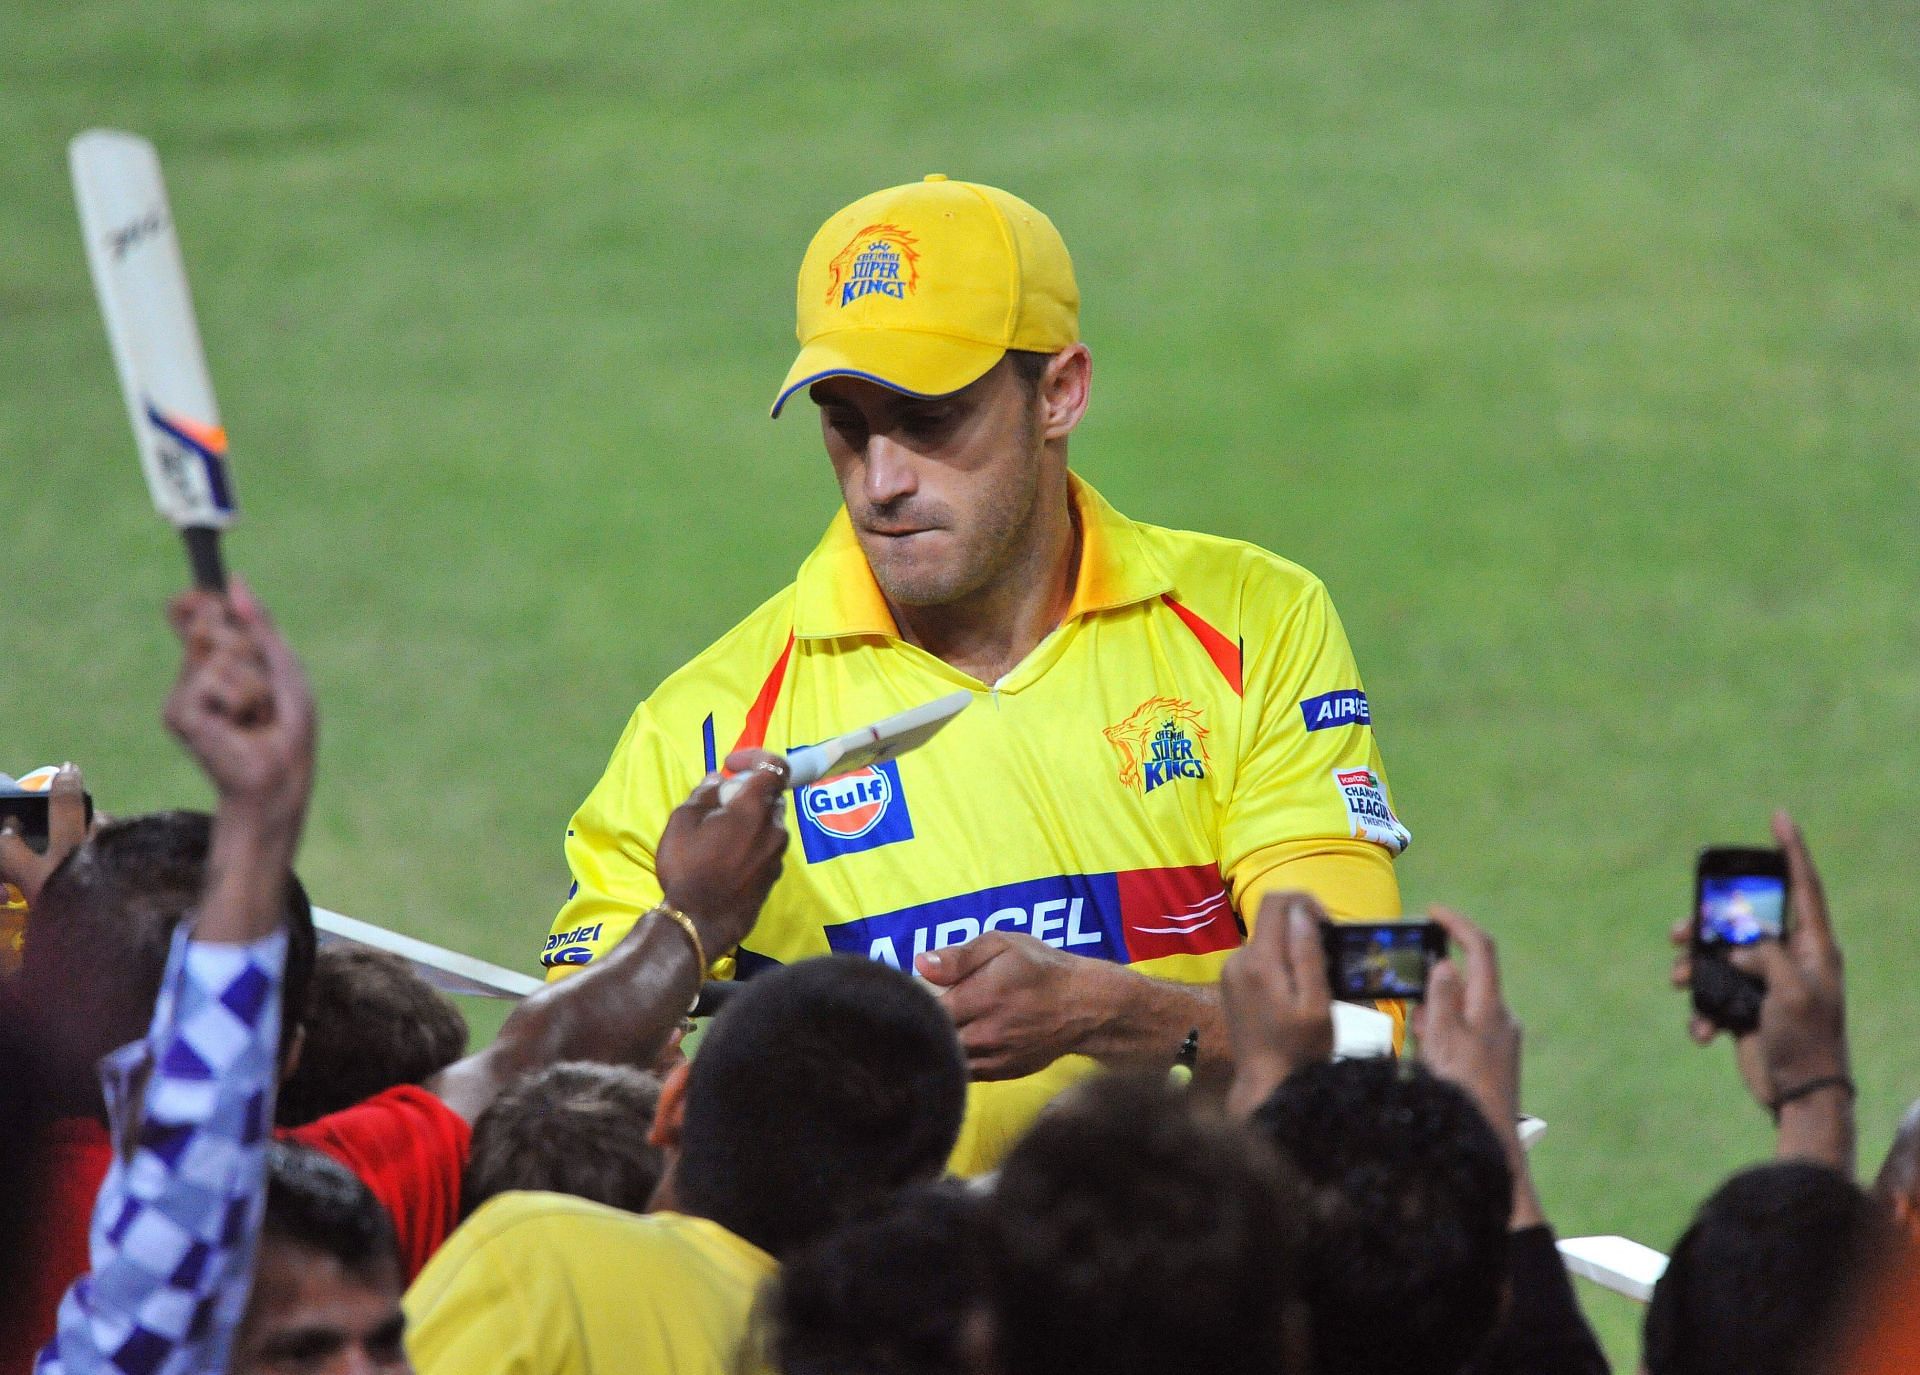 Faf du Plessis in the Chennai Super Kings jersey. (Pic: Getty Images)